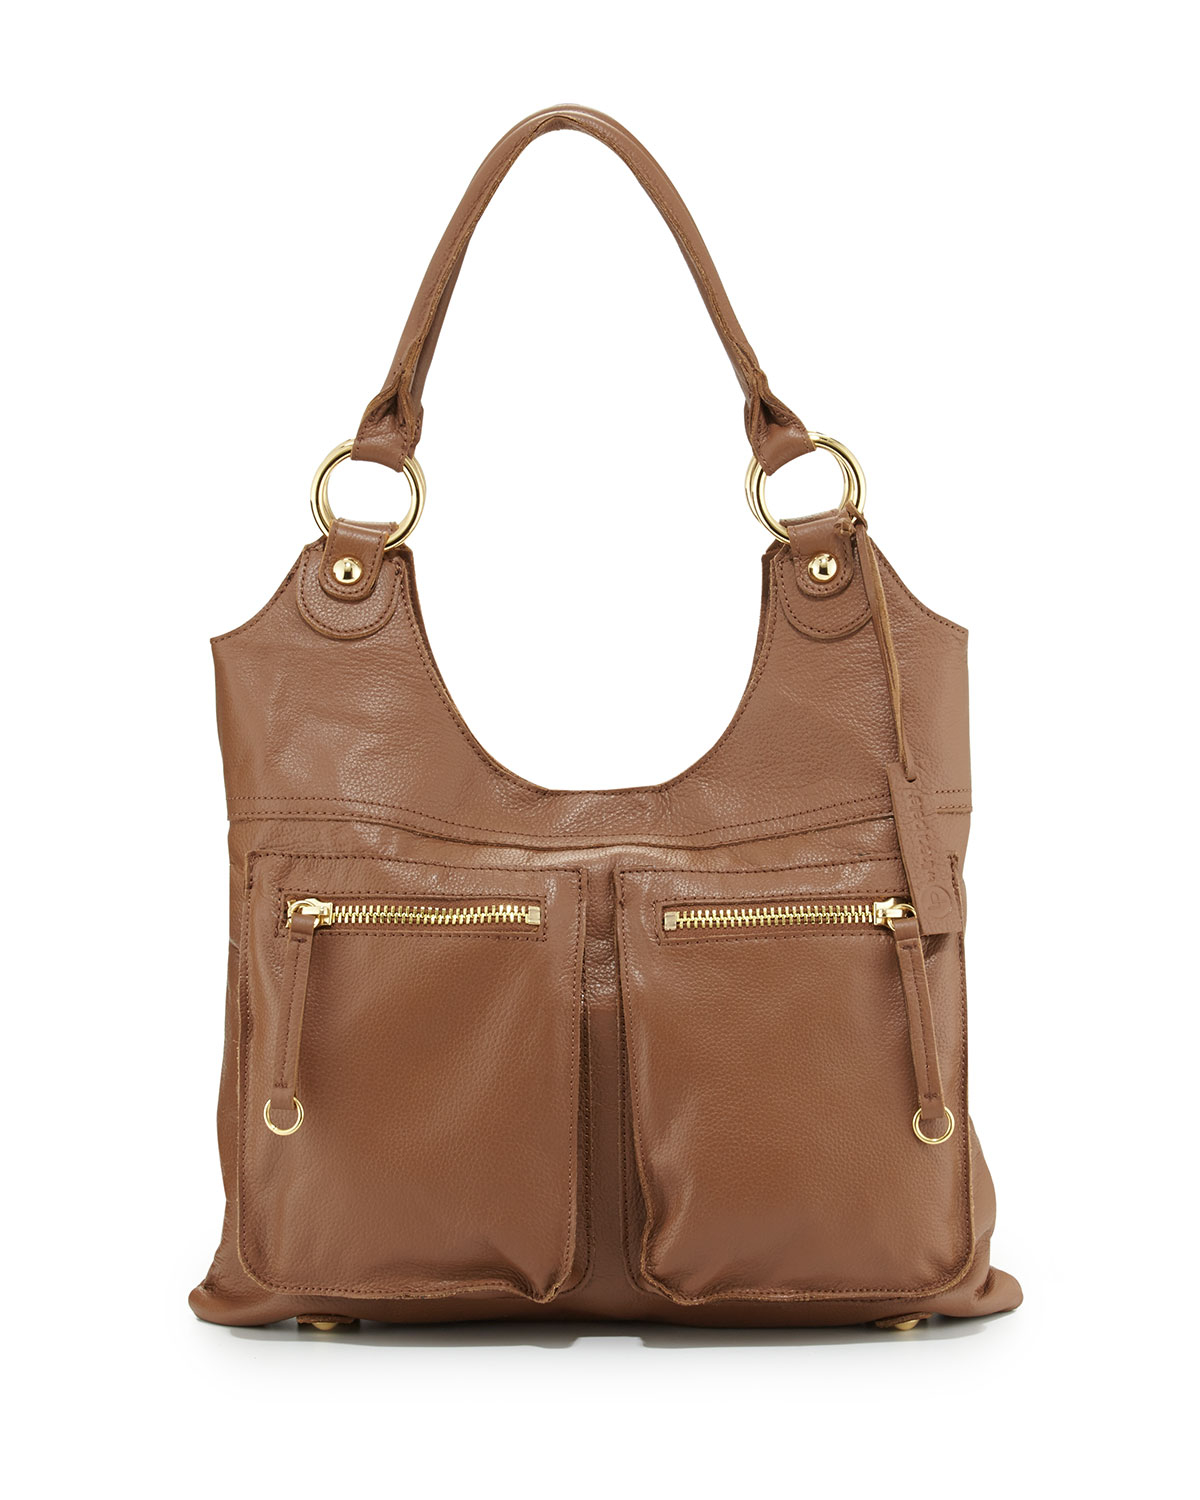 Linea pelle Dylan Front-Pocket Leather Tote Bag in Brown (coffee) | Lyst